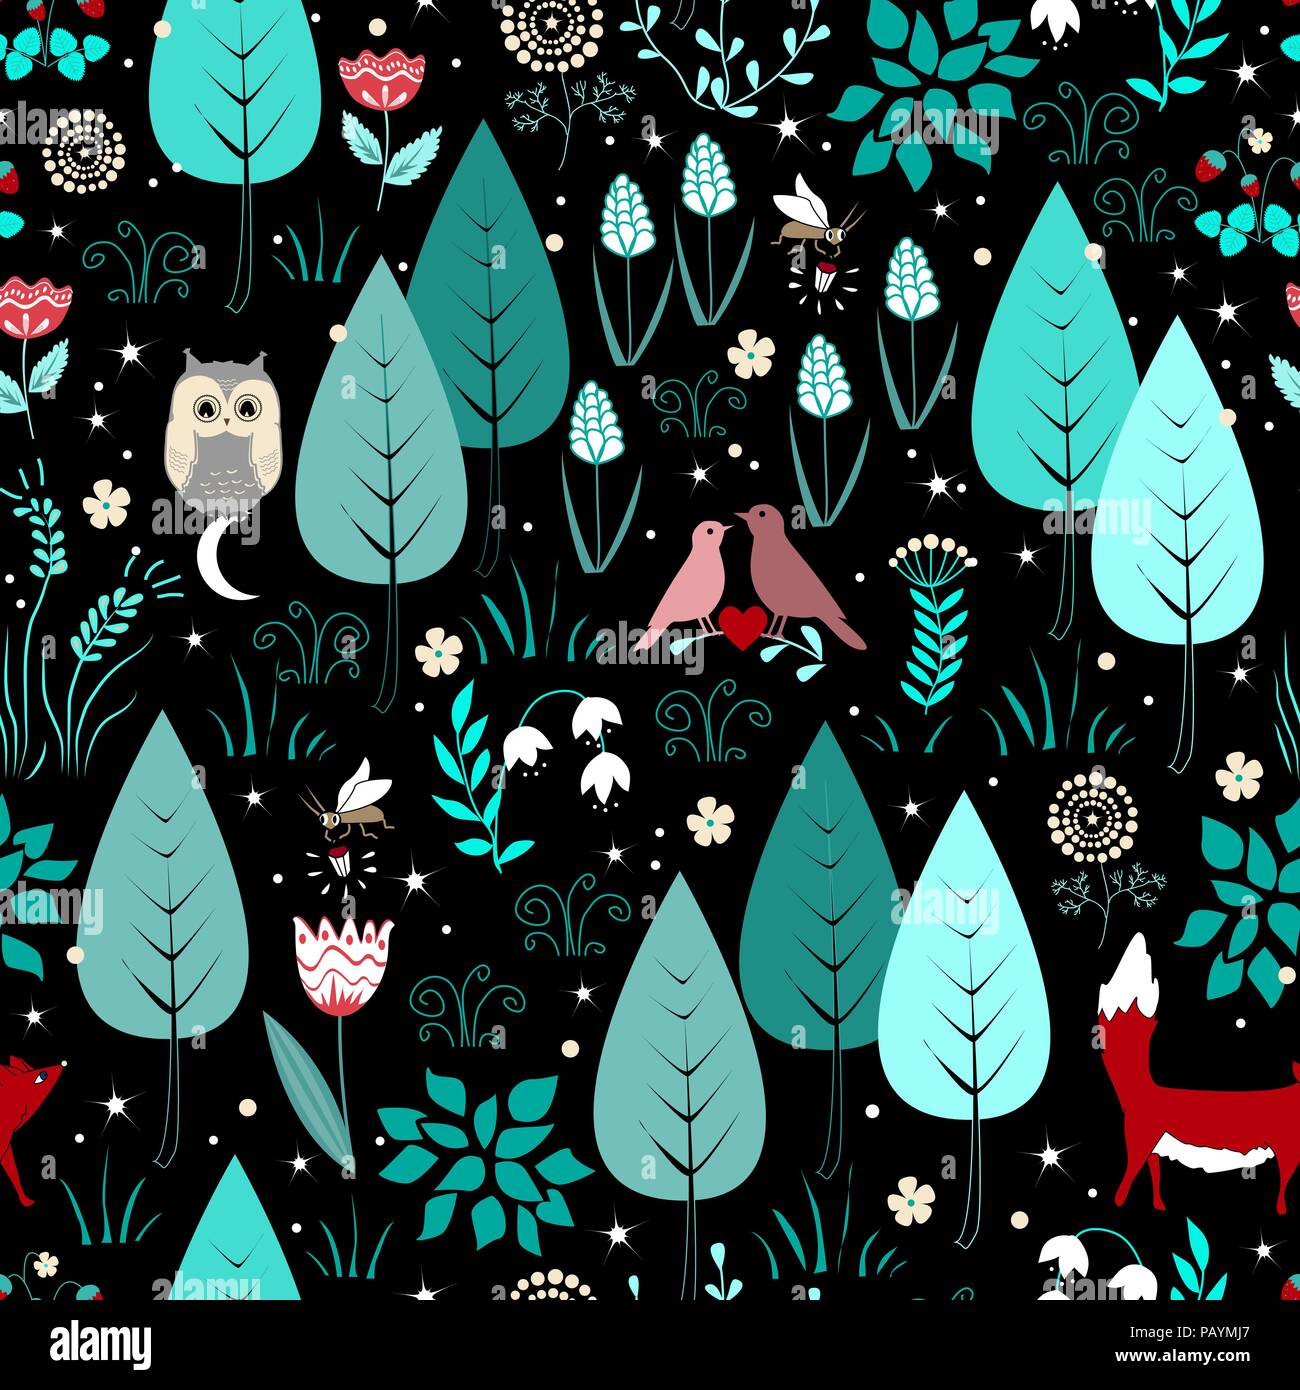 Spring or summer pattern with fox, birds, flowers, and trees. Cute magic forest background. Doodle vector Stock Vector